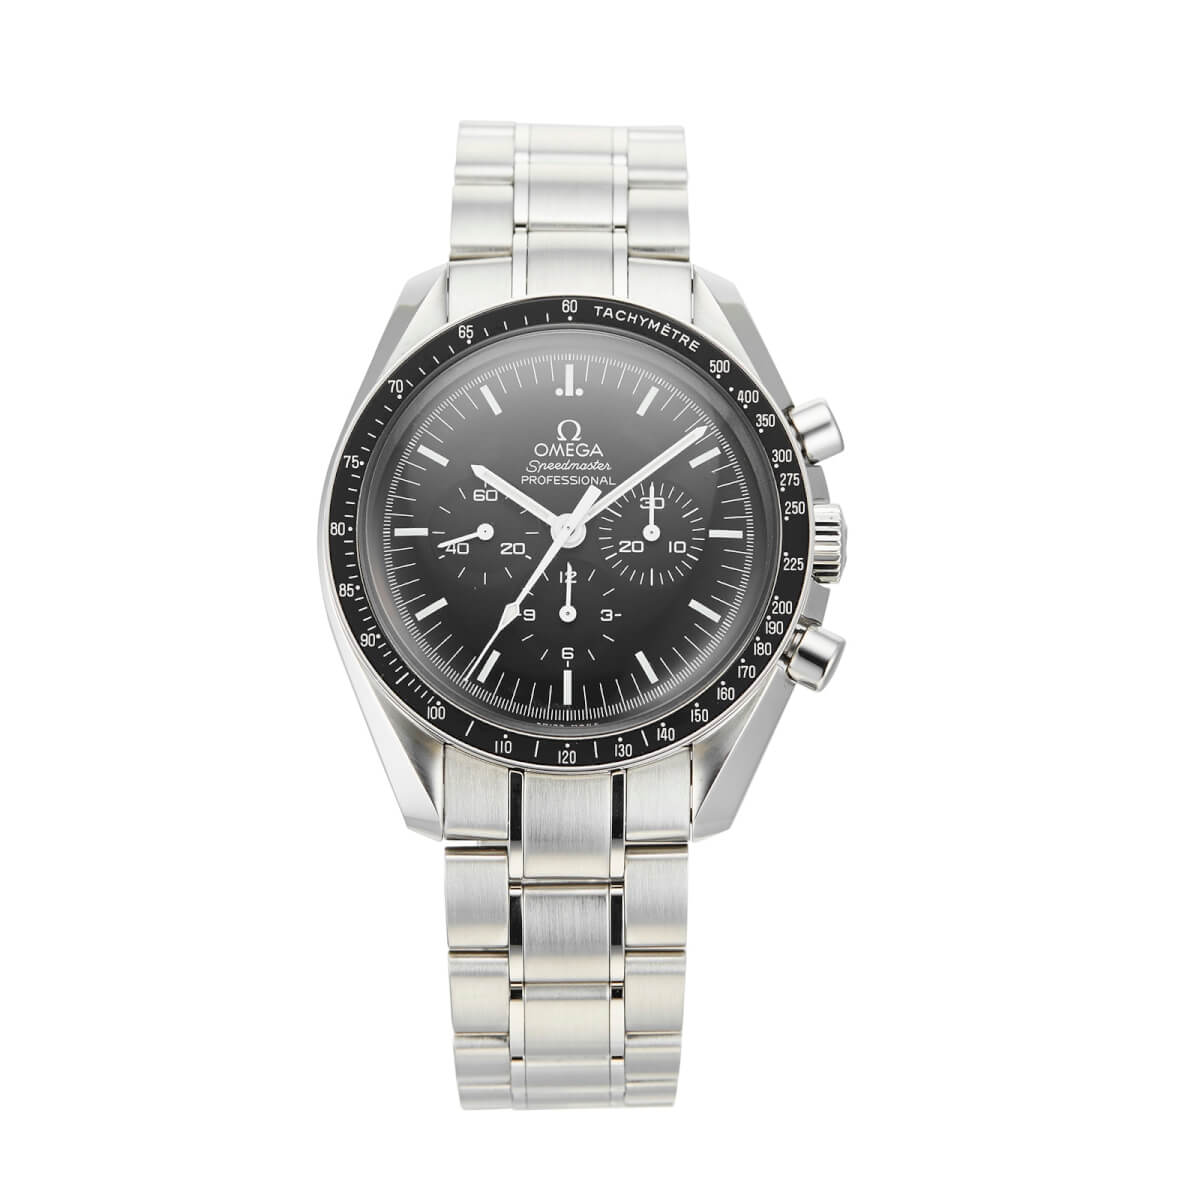 Pre-Owned OMEGA Speedmaster Moonwatch Professional Mens Watch 311.30.42.30.01.005